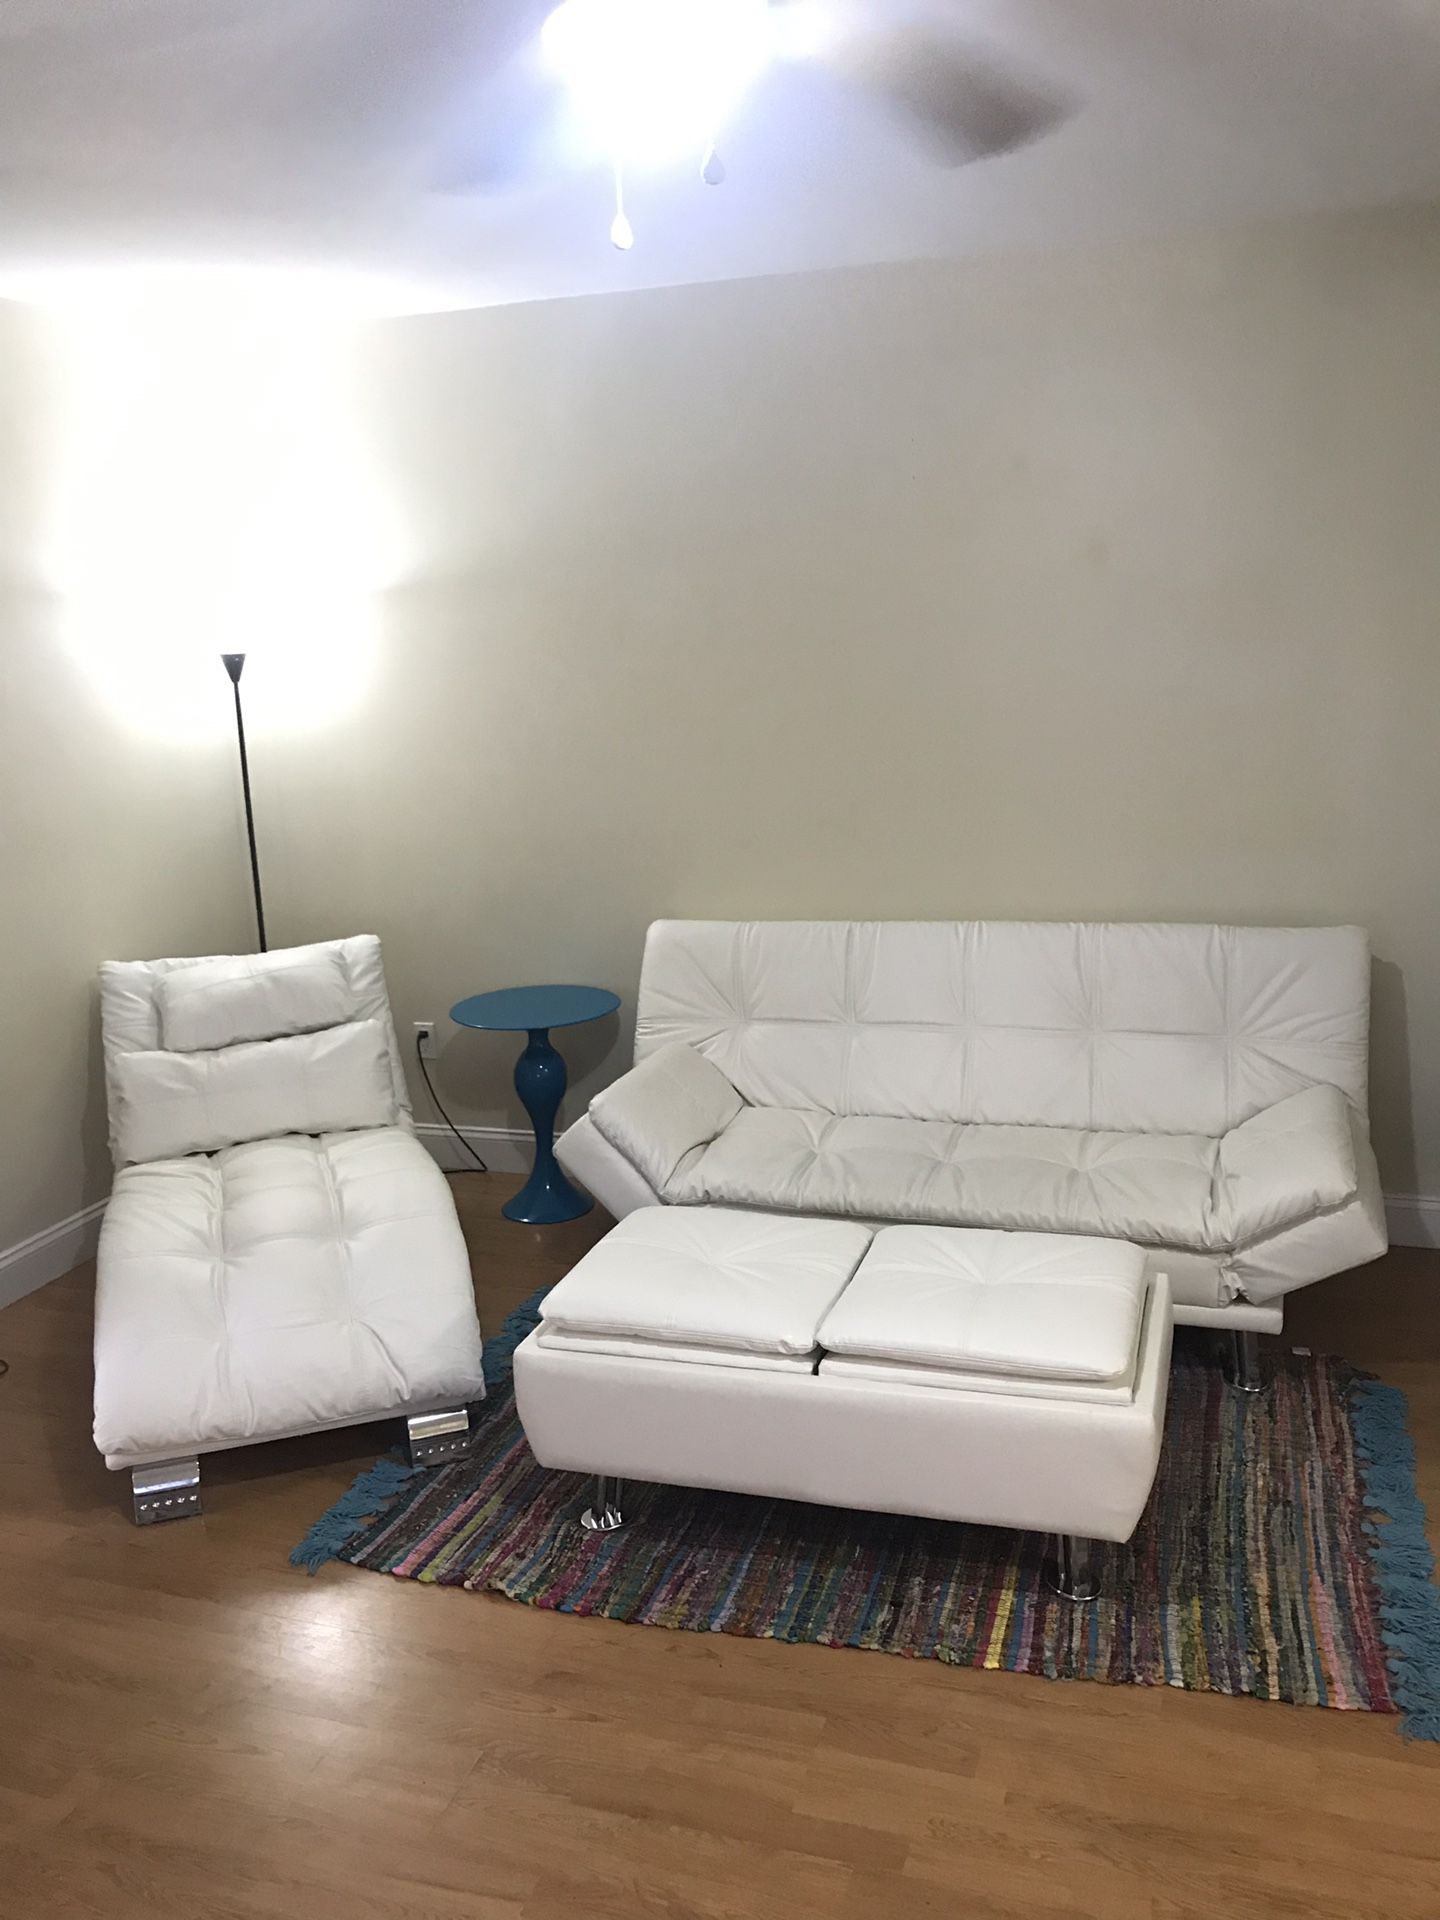 THREE PIECE WHITE LEATHER FURNITURE FOR SALE!!